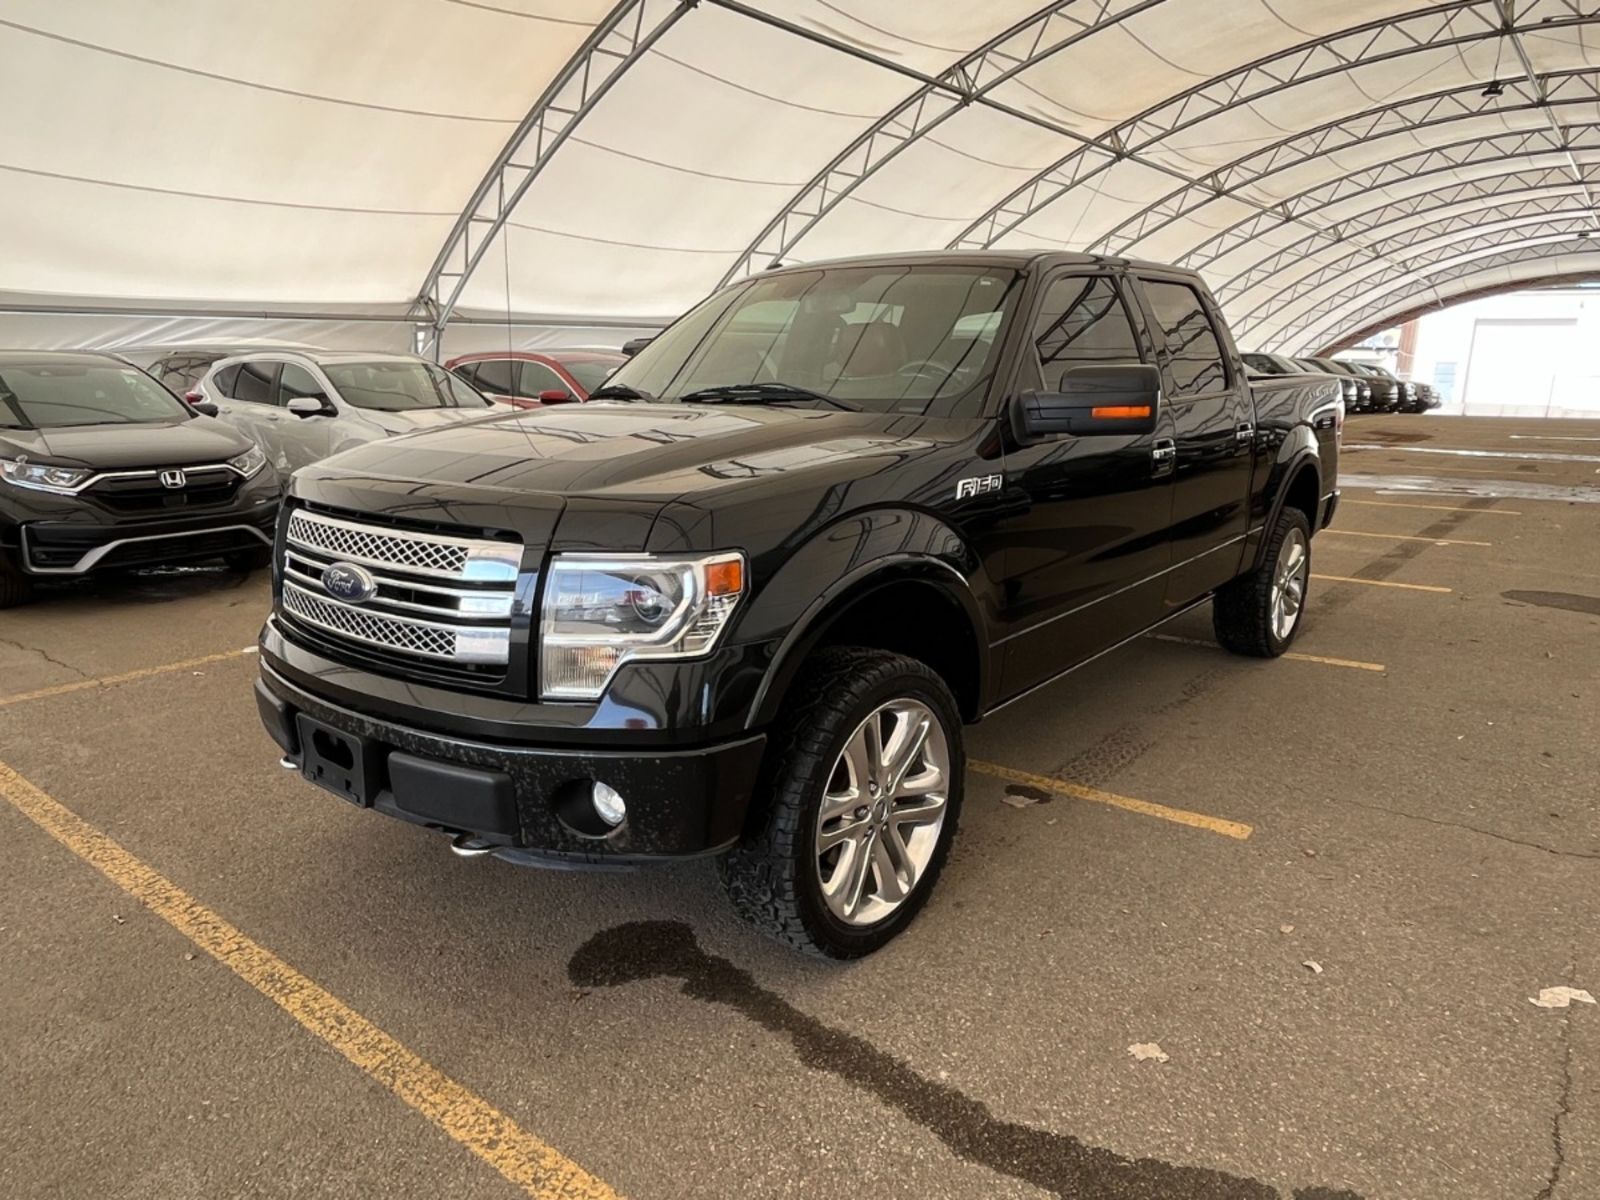 2013 Ford F-150 XLT - No Accidents, One Owner, Low KMS 